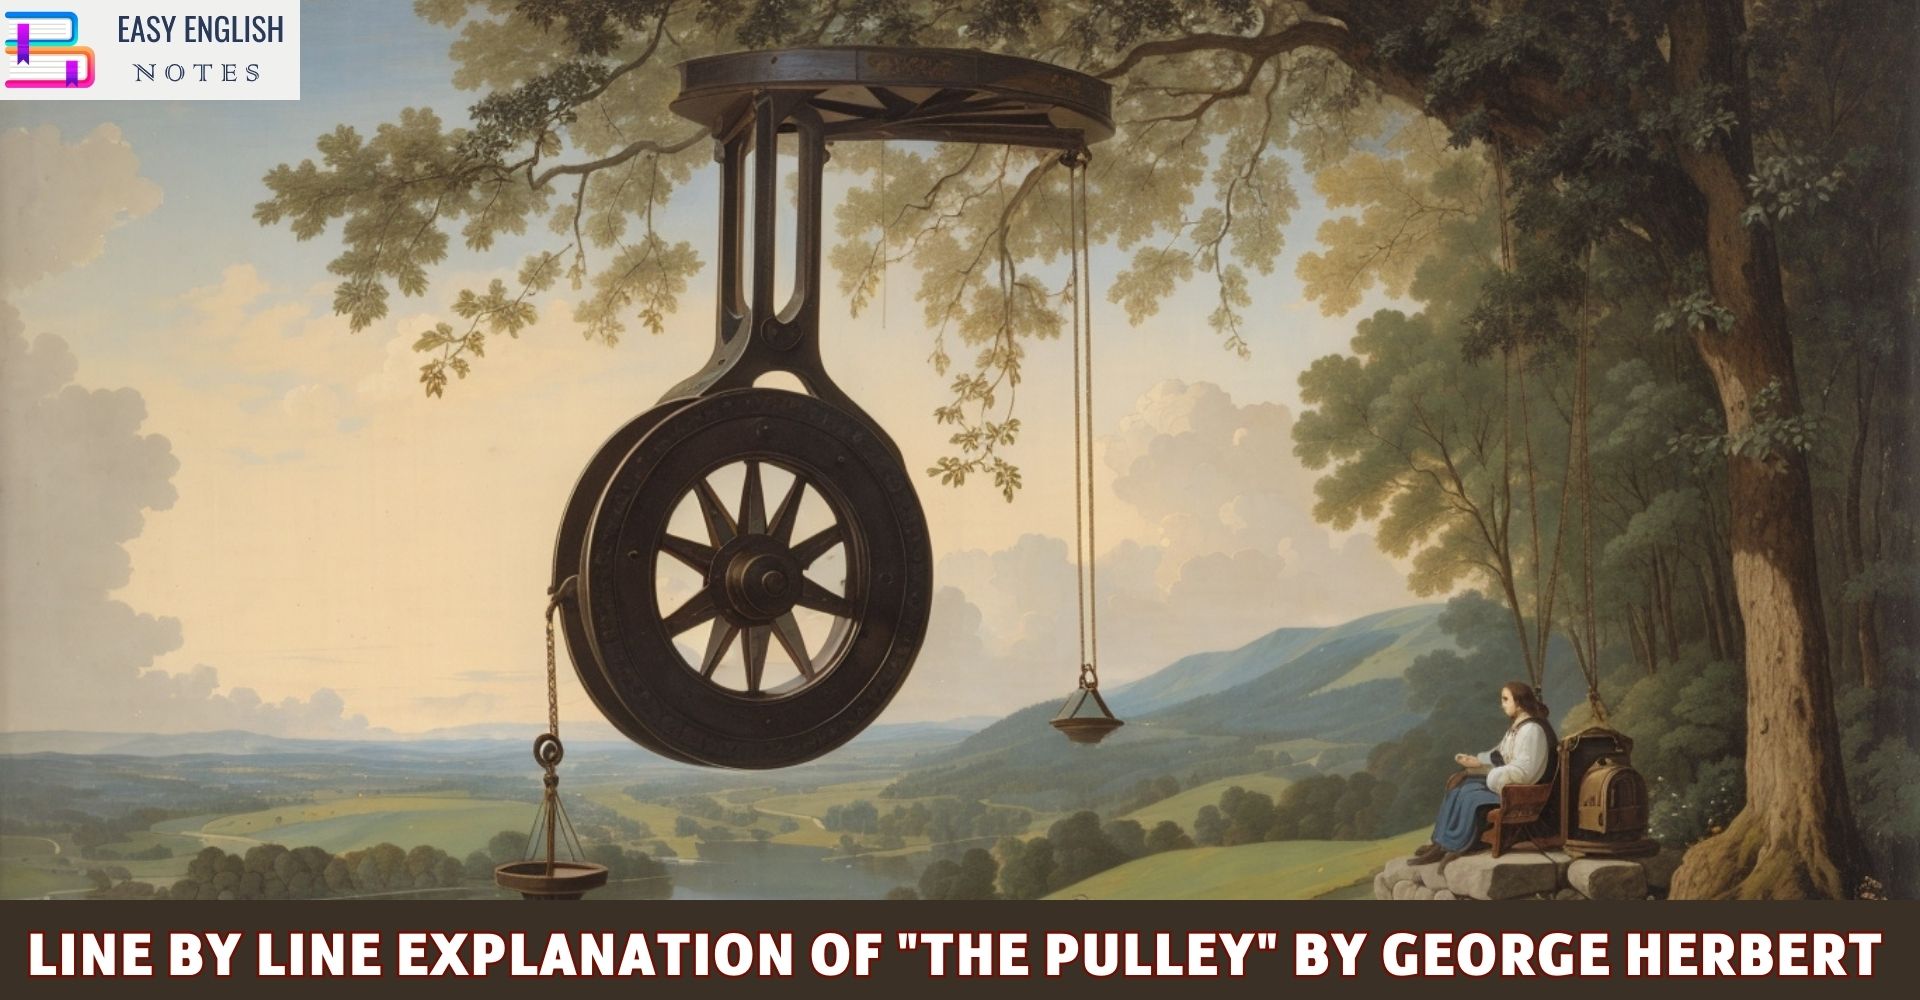 Line by Line Explanation of "The Pulley" by George Herbert